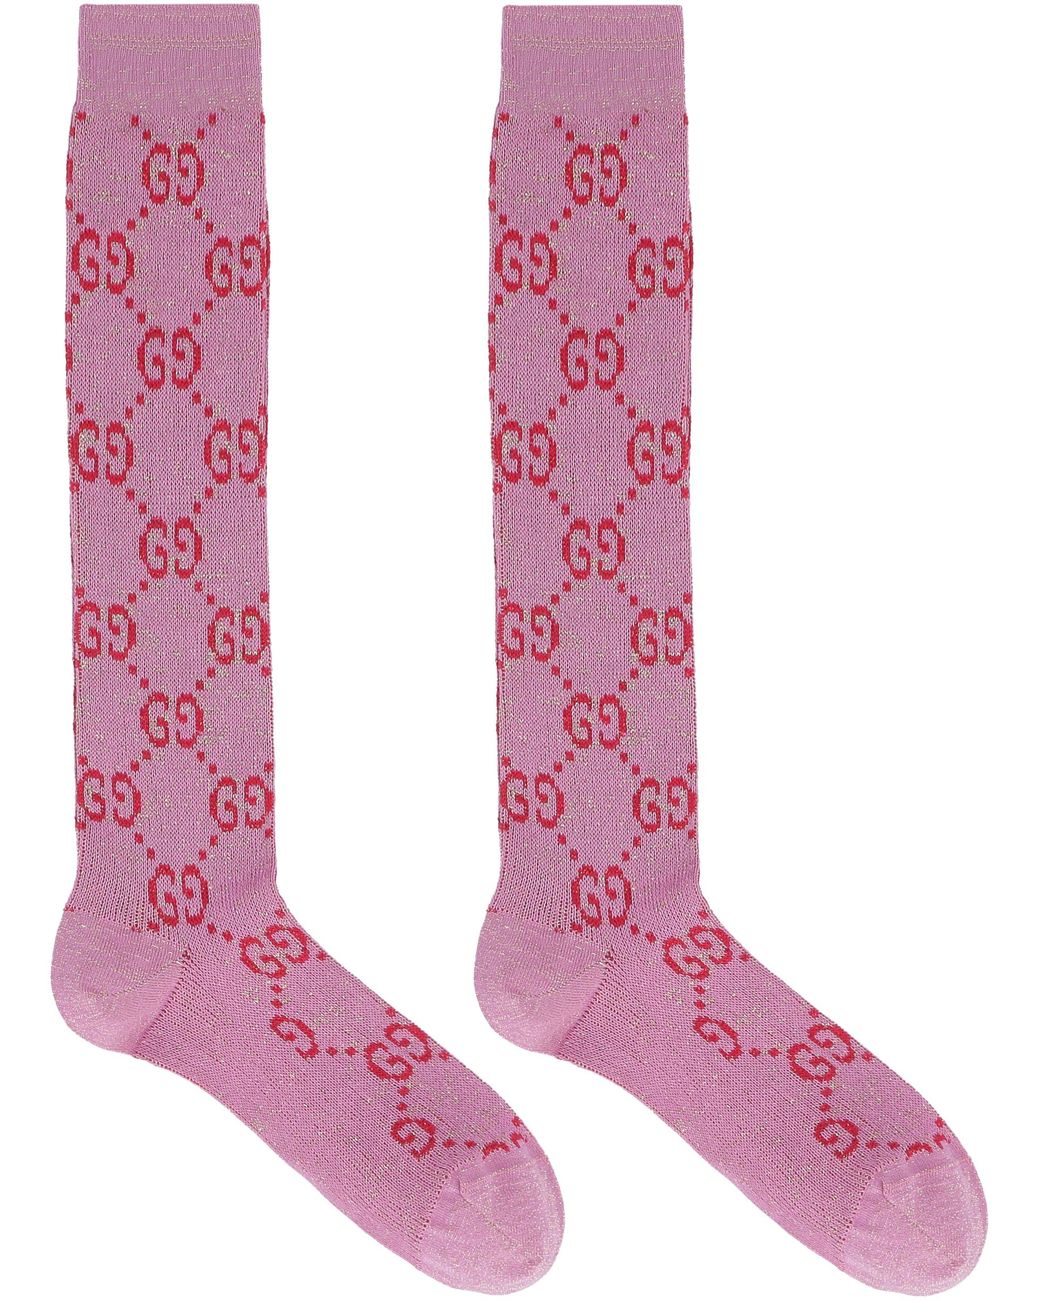 Gucci Cotton Lamé GG Socks in Pink & Purple (Pink) - Save 46% - Lyst